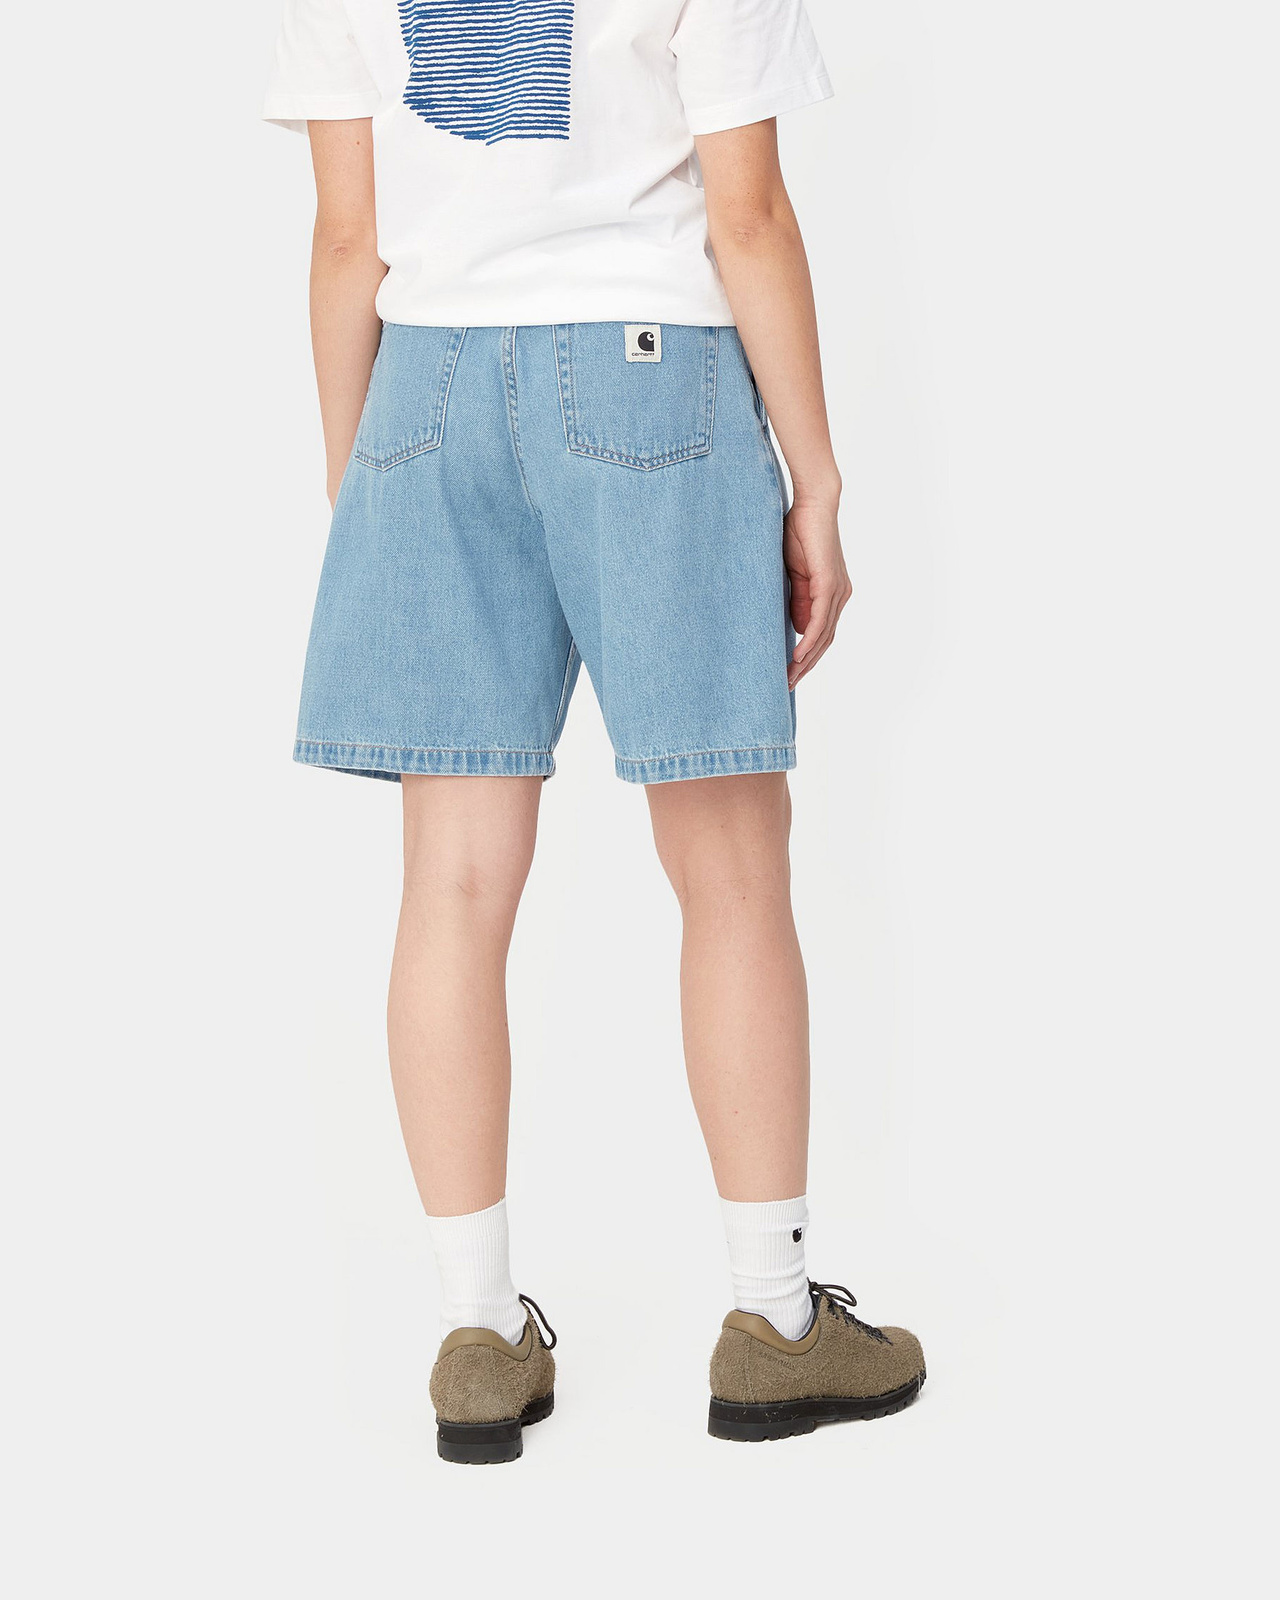 Shorts Alta W´s - Blue Stone Bleached - S